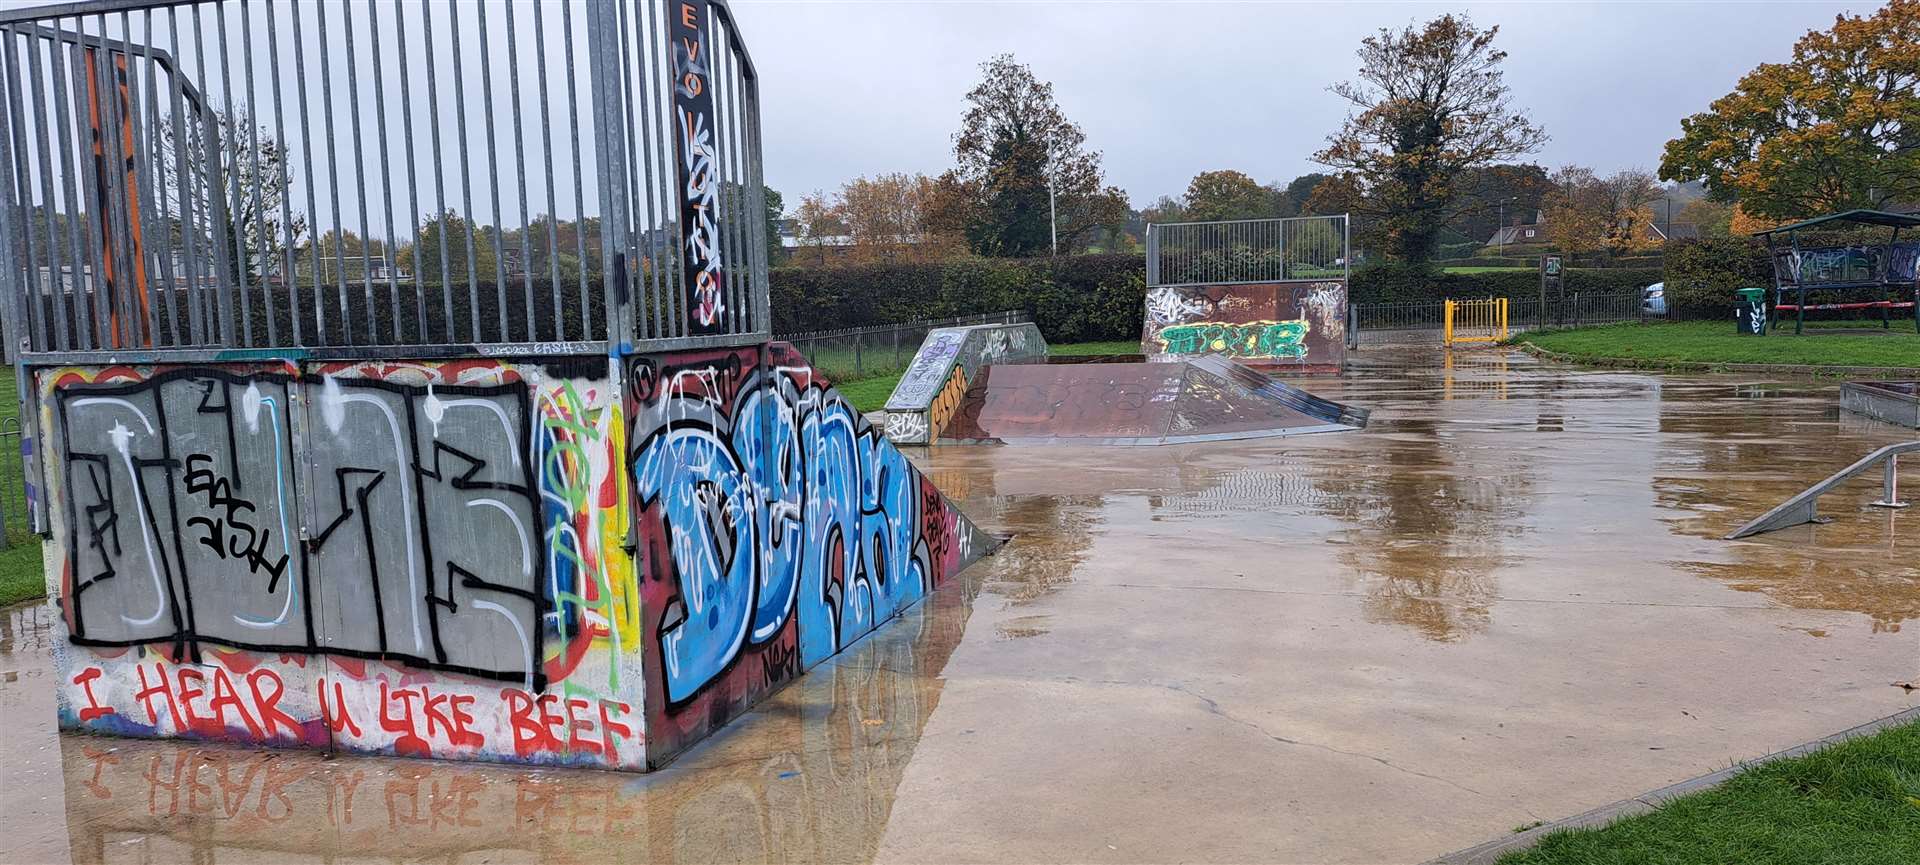 The existing skateboard park at Paddock Wood